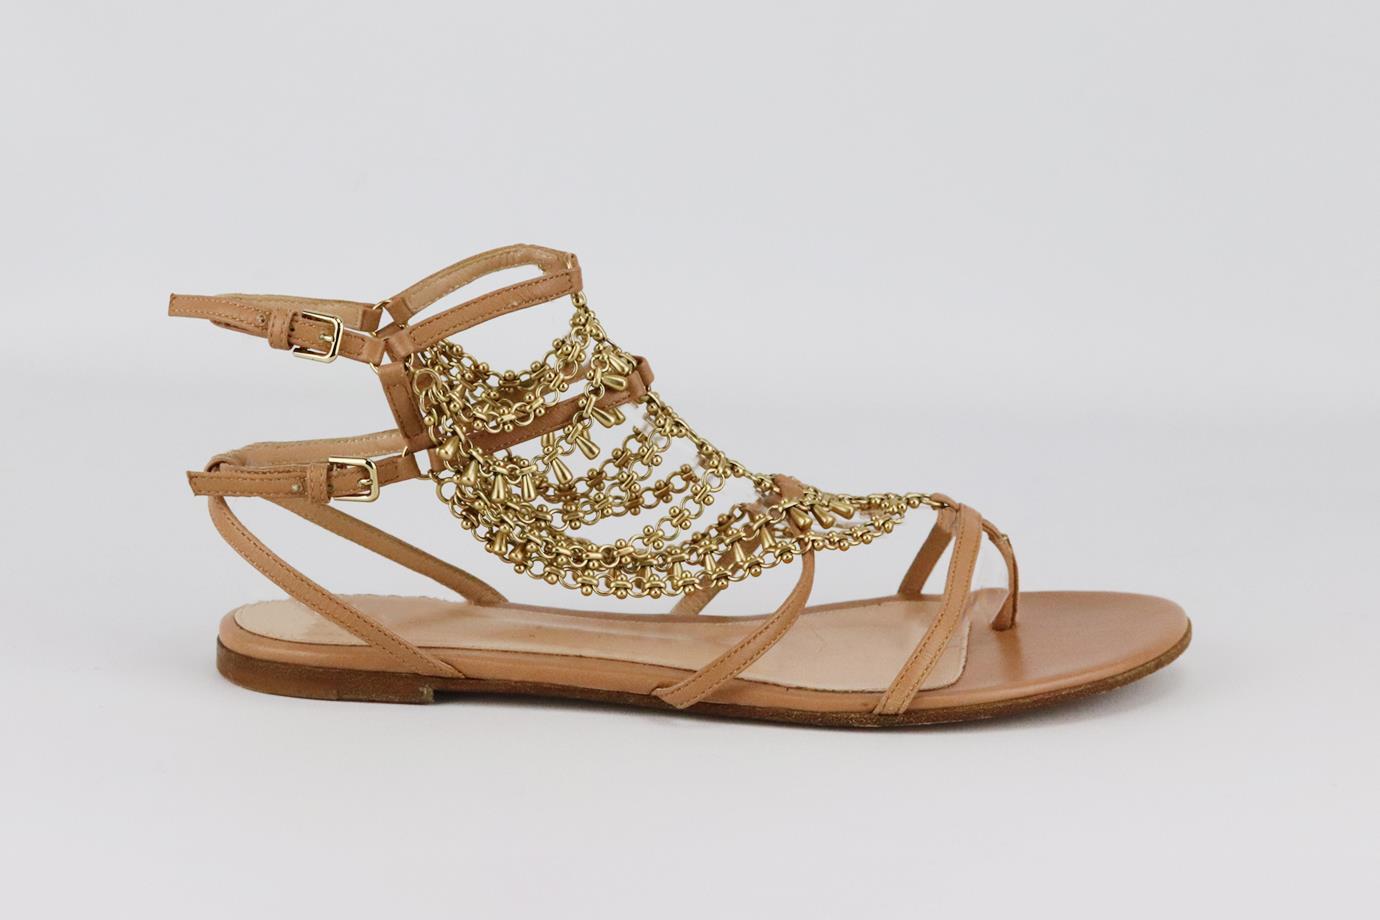 Gianvito Rossi chain embellished leather sandals. Nude. Buckle fastening at side. Does not come with box or dustbag. Size: EU 38 (UK 5, US 8). Insole: 9.4 in. Heel: 0.5 in
